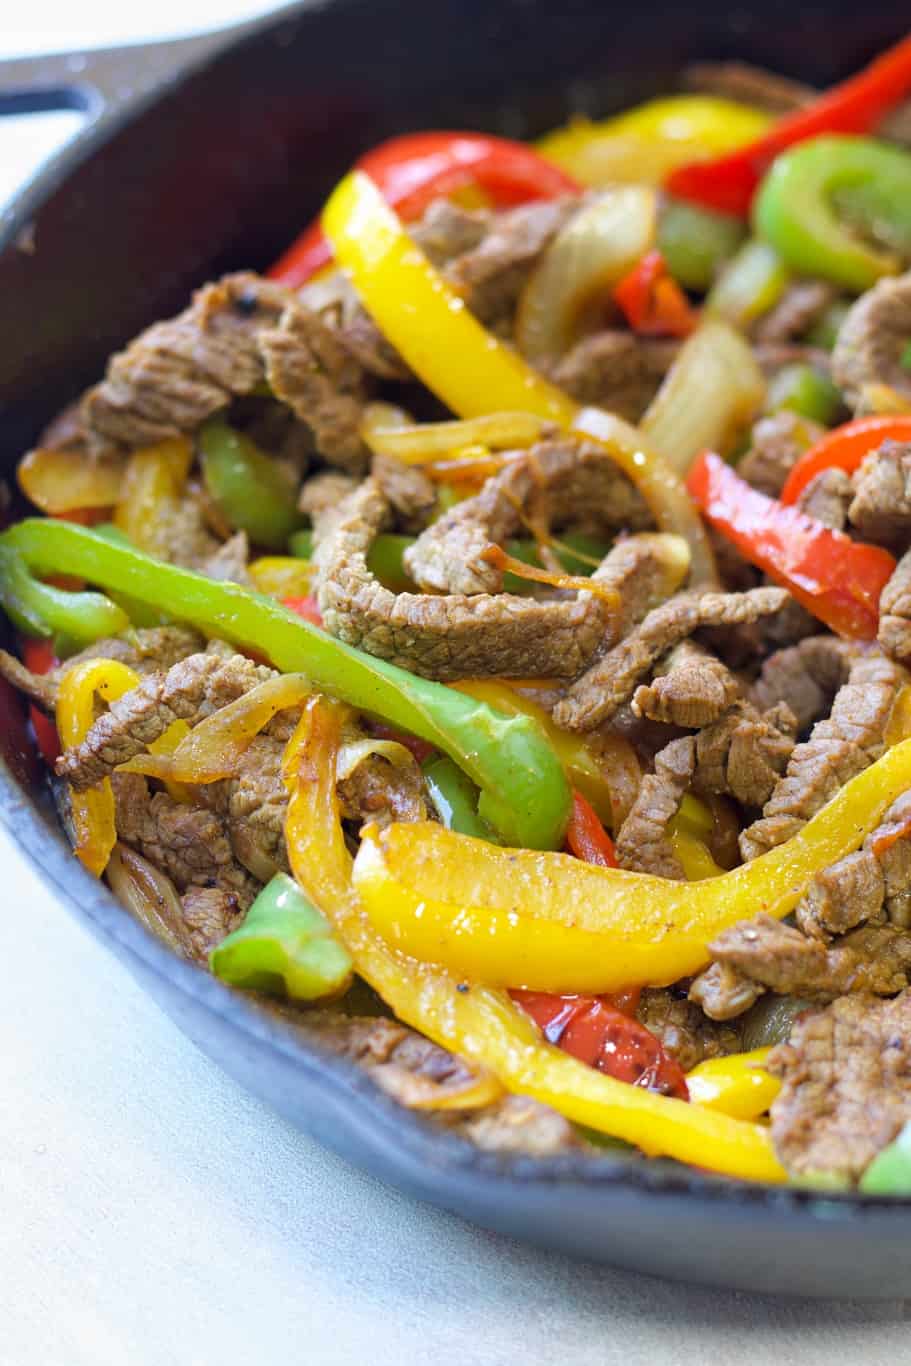 keto-friendly fajitas skillet made up of skirt steak, onions, green, red, and yellow bell peppers